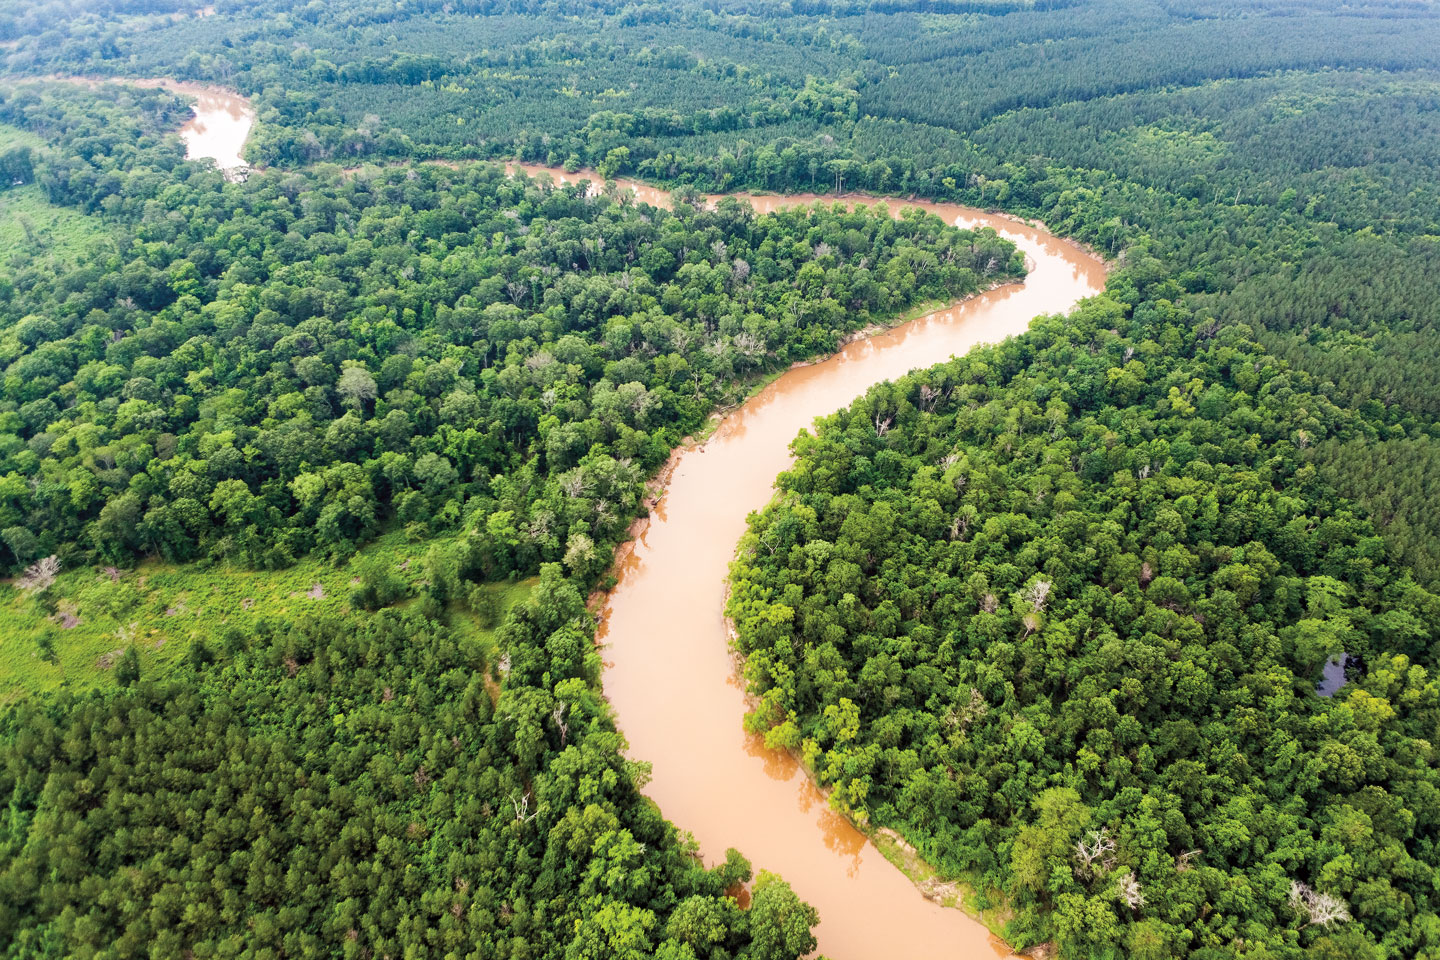 Aerial view of the Sabine River cutting through the forest